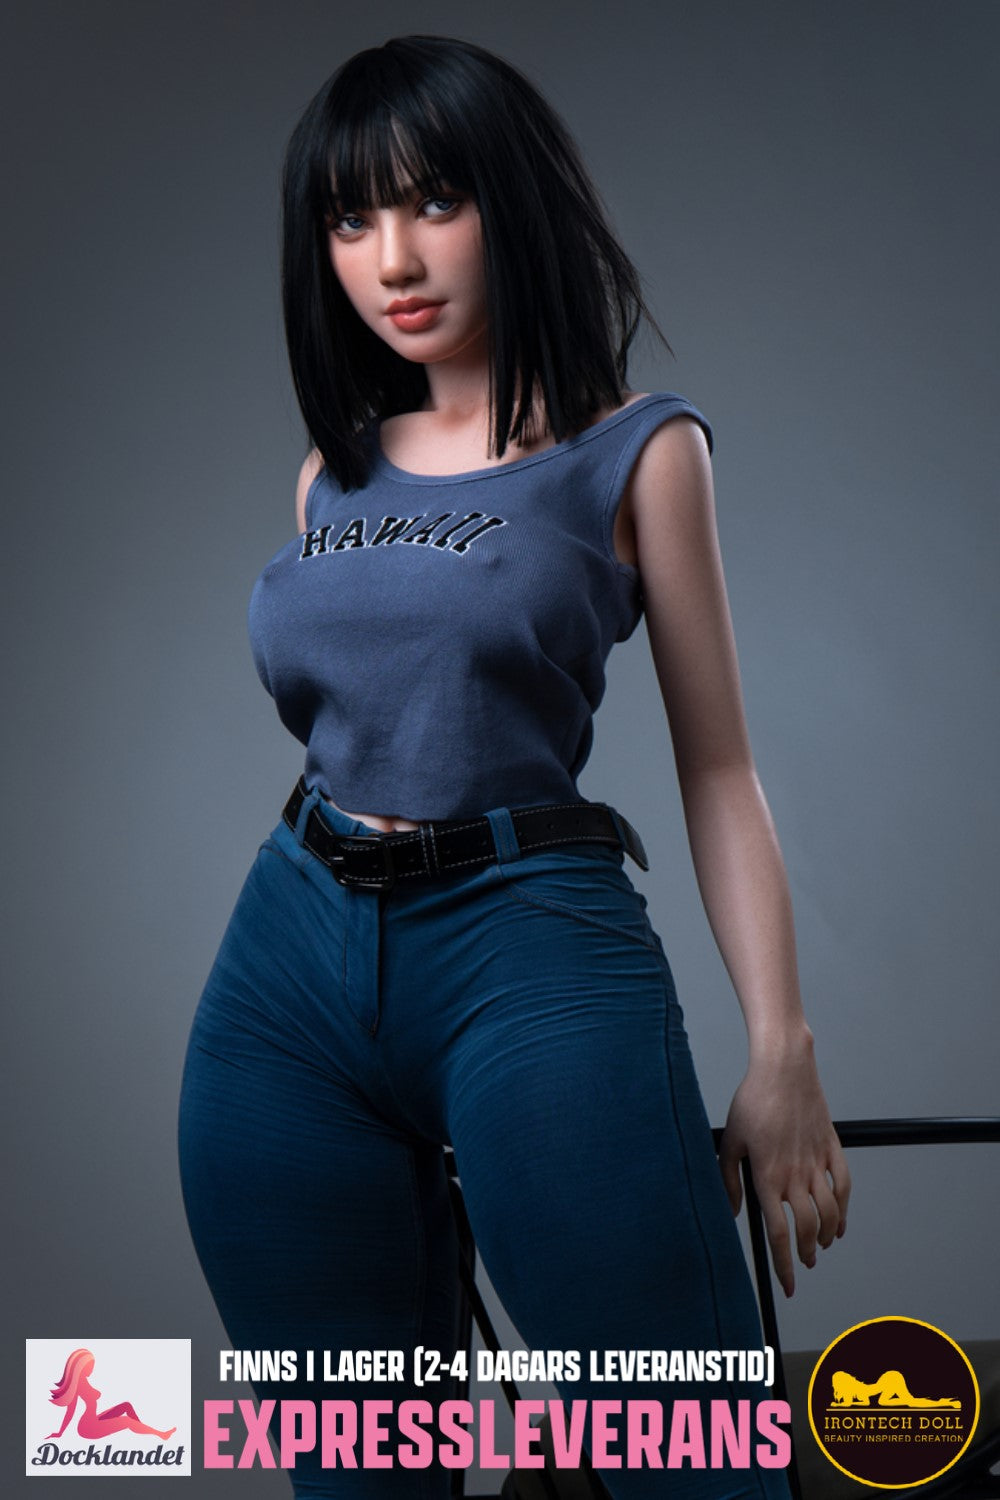 Draw Sex Doll (Irontech Doll 153cm e-cup S30 silicone) EXPRESS